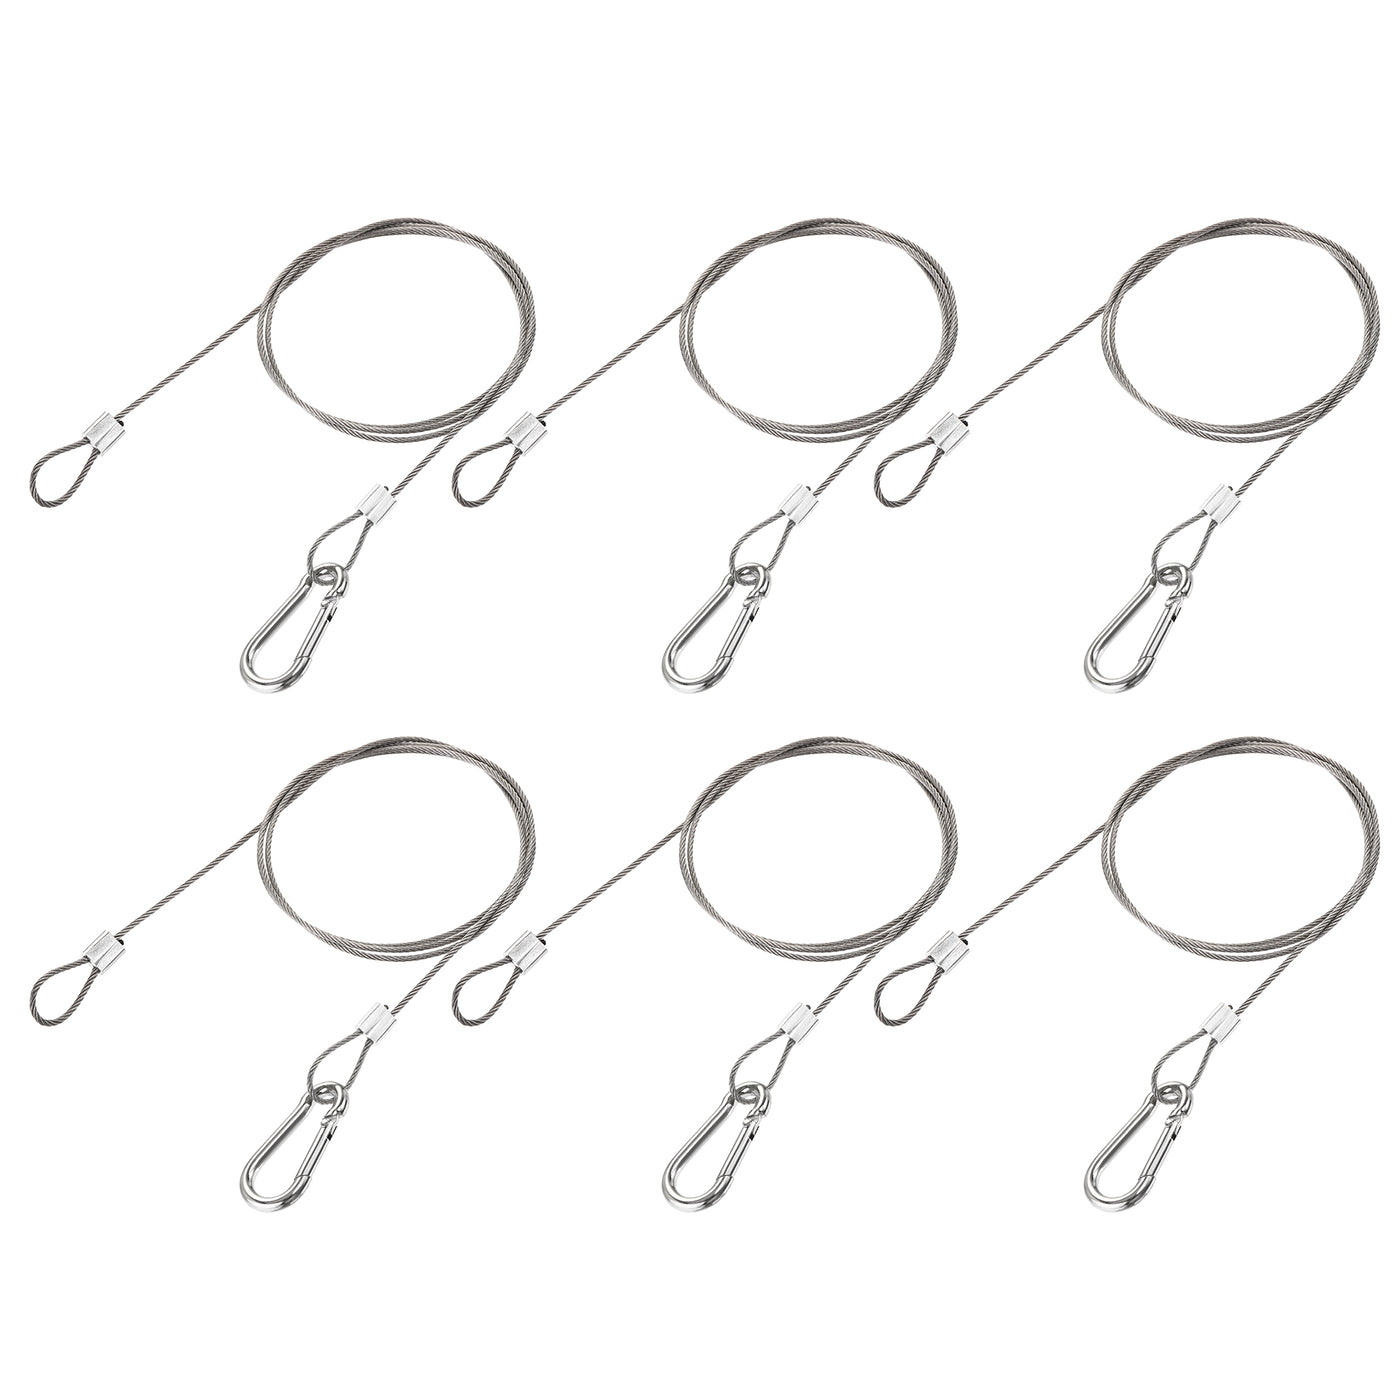 uxcell Uxcell Picture Hanging Wire Kit, 6Set 1M Loop and Hook Hanging Wire for Home Picture Art Gallery Picture Display Kit, Load 66 lbs